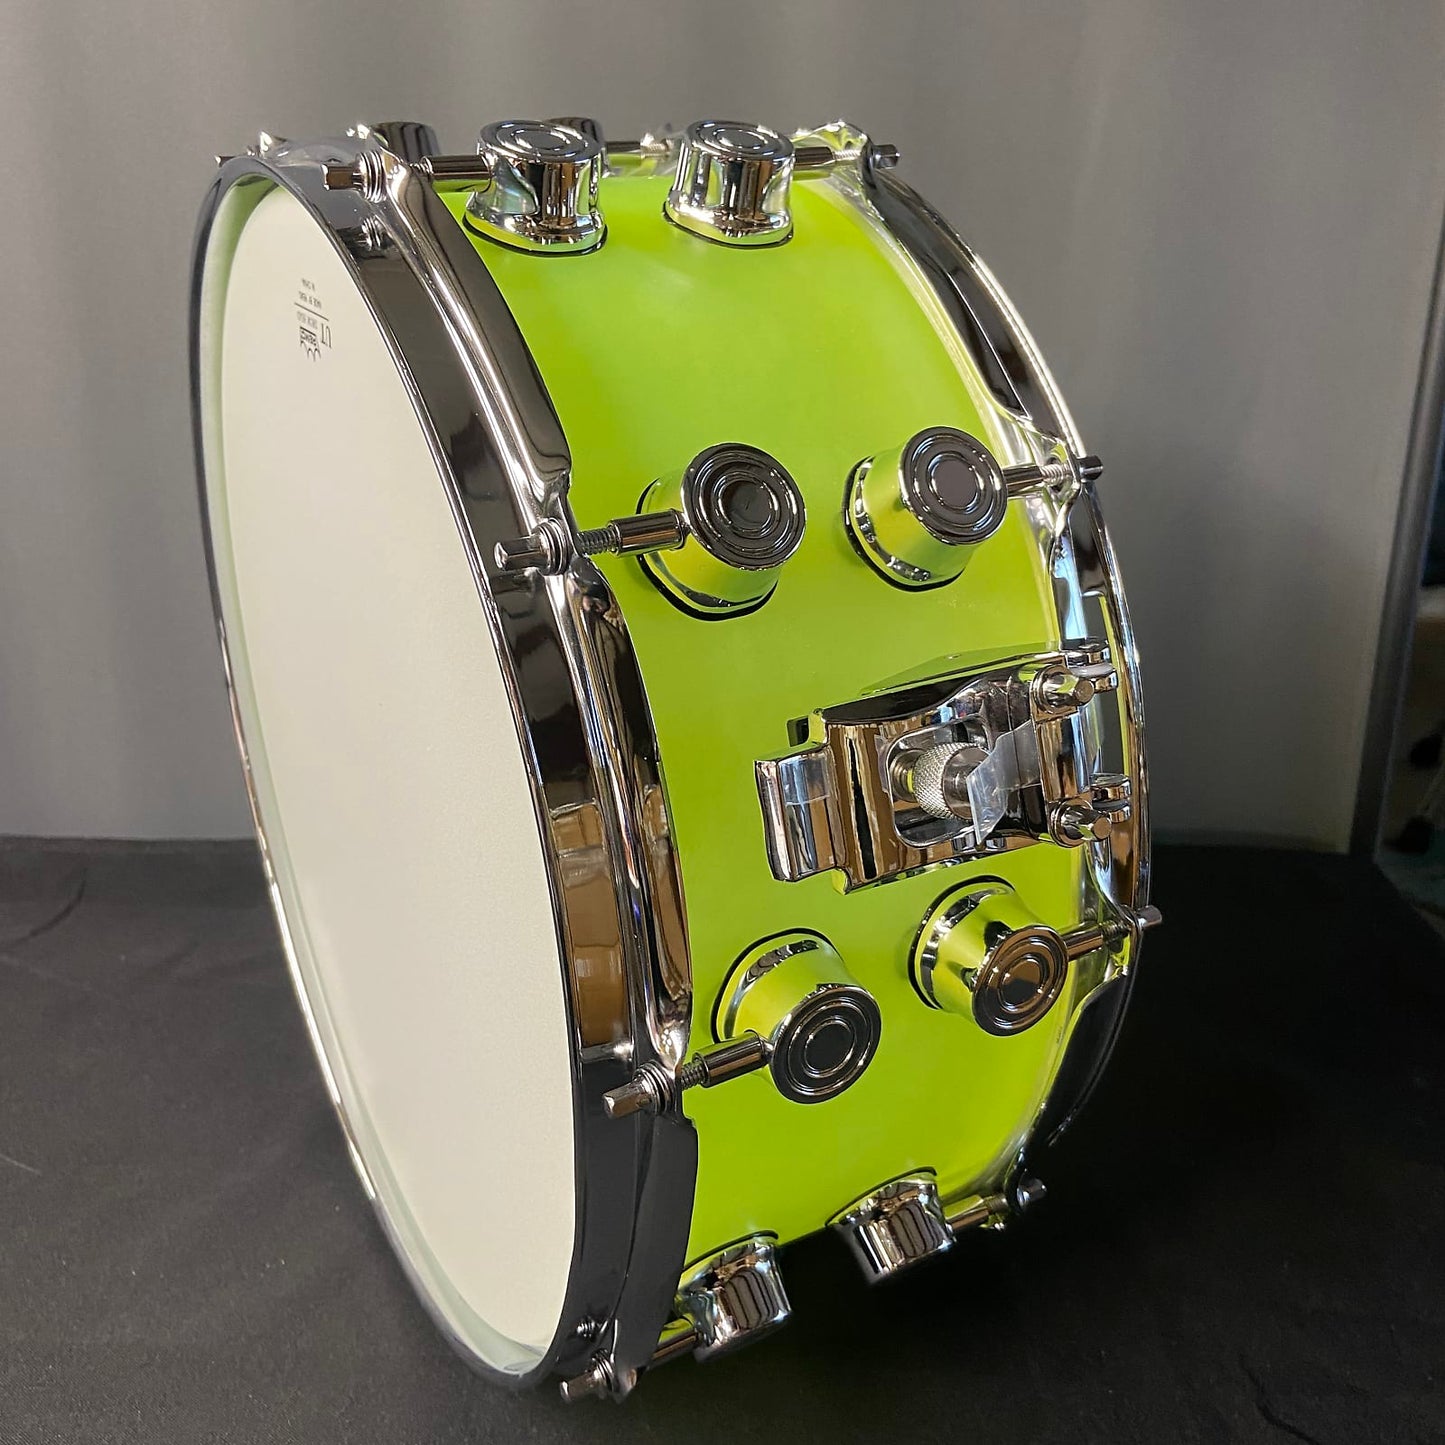 Frosted Fluorescent Green Acrylic Snare Drum